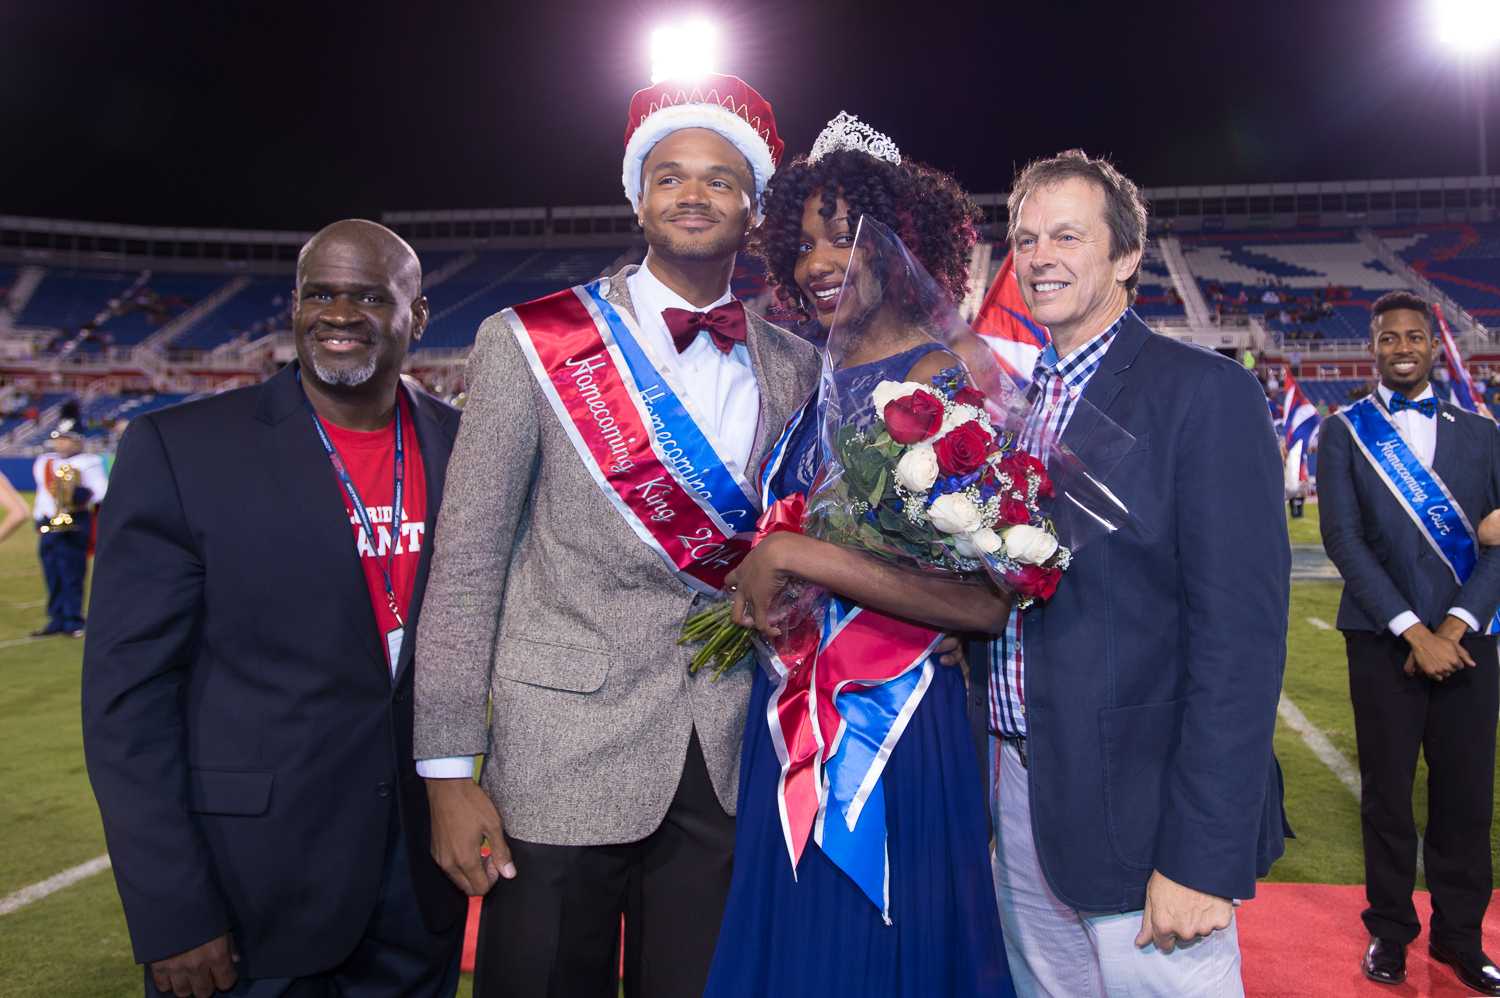 [ Max Jackson | Photo Editor ] FAU Homecoming King Byron Knight and Queen Sherrika Mitchel pose with President Kelly and Dr. King at FAU’s Homecoming game against UAB.